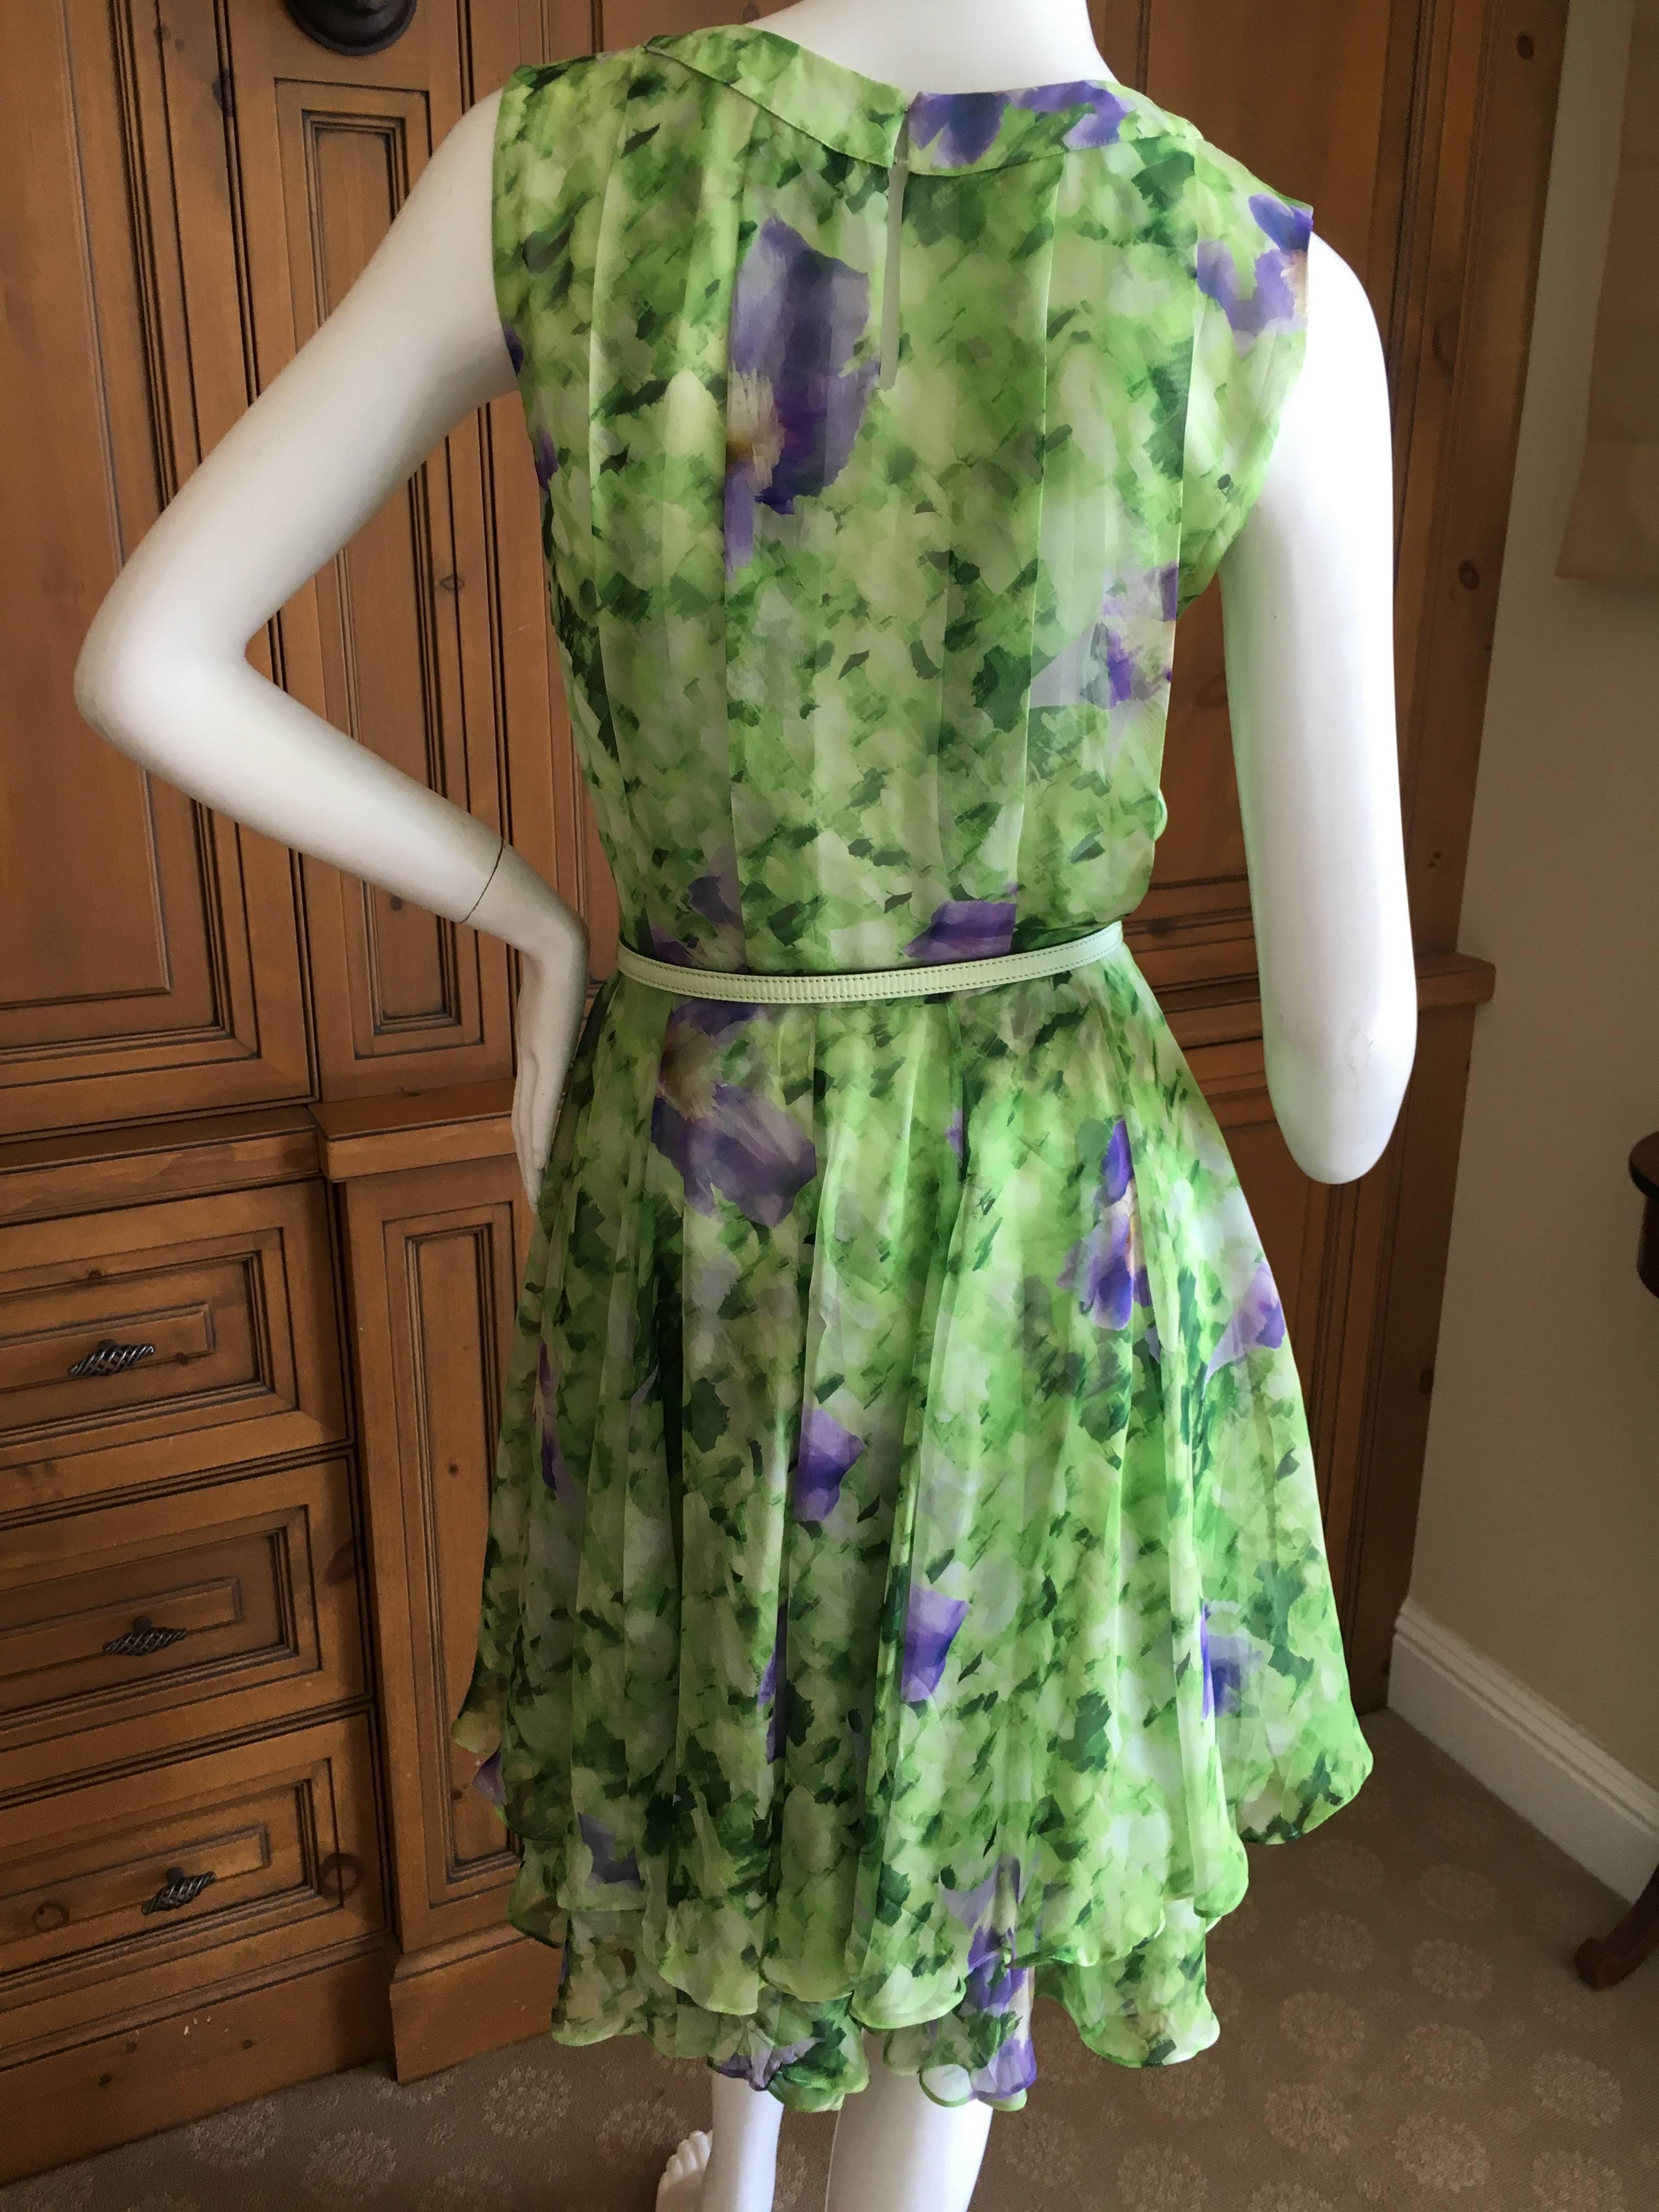 Oscar de la Renta Silk Floral Dress with Belt and Sweater.
Size 0
Sleeveless silk floral dress with matching leather lined belt, and knit short cardigan bolero.
Bust 36"
Waist 25"
Hips 42"
Length 40"
Excellent condition